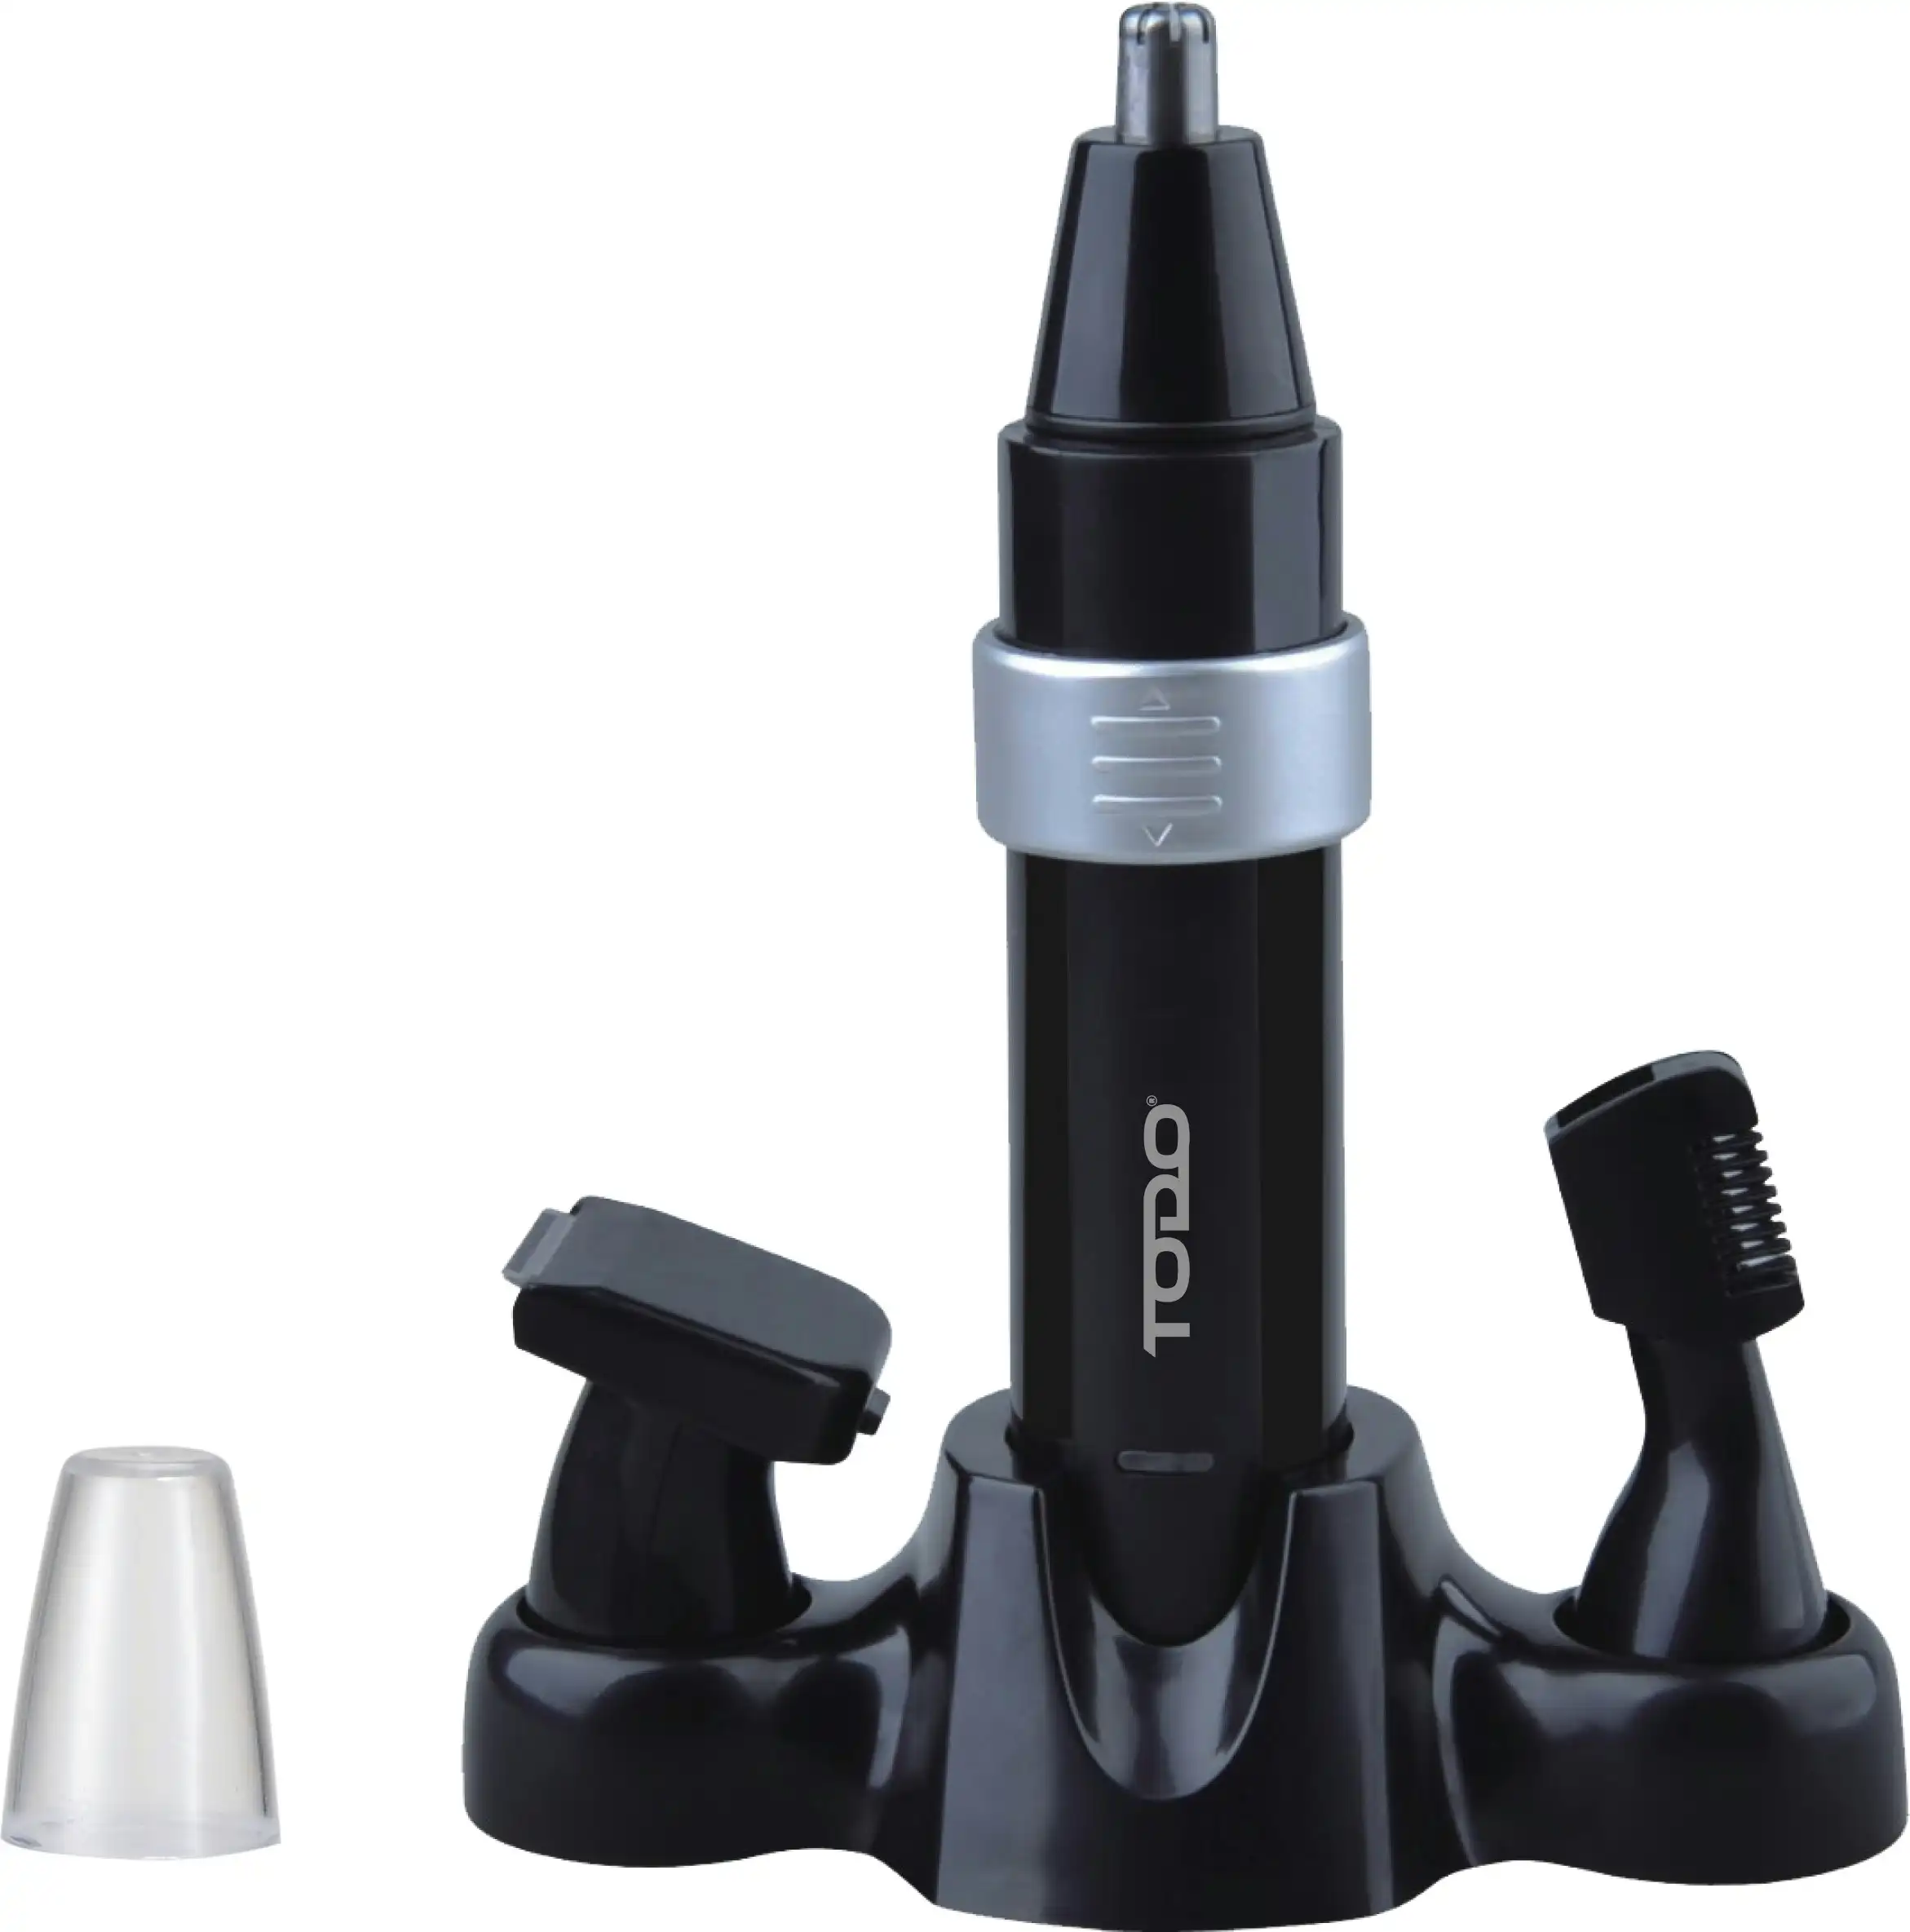 TODO 3 In 1 Rechargeable Personal Trimmer Nose Ear Beard Eyebrow Hair Groomer